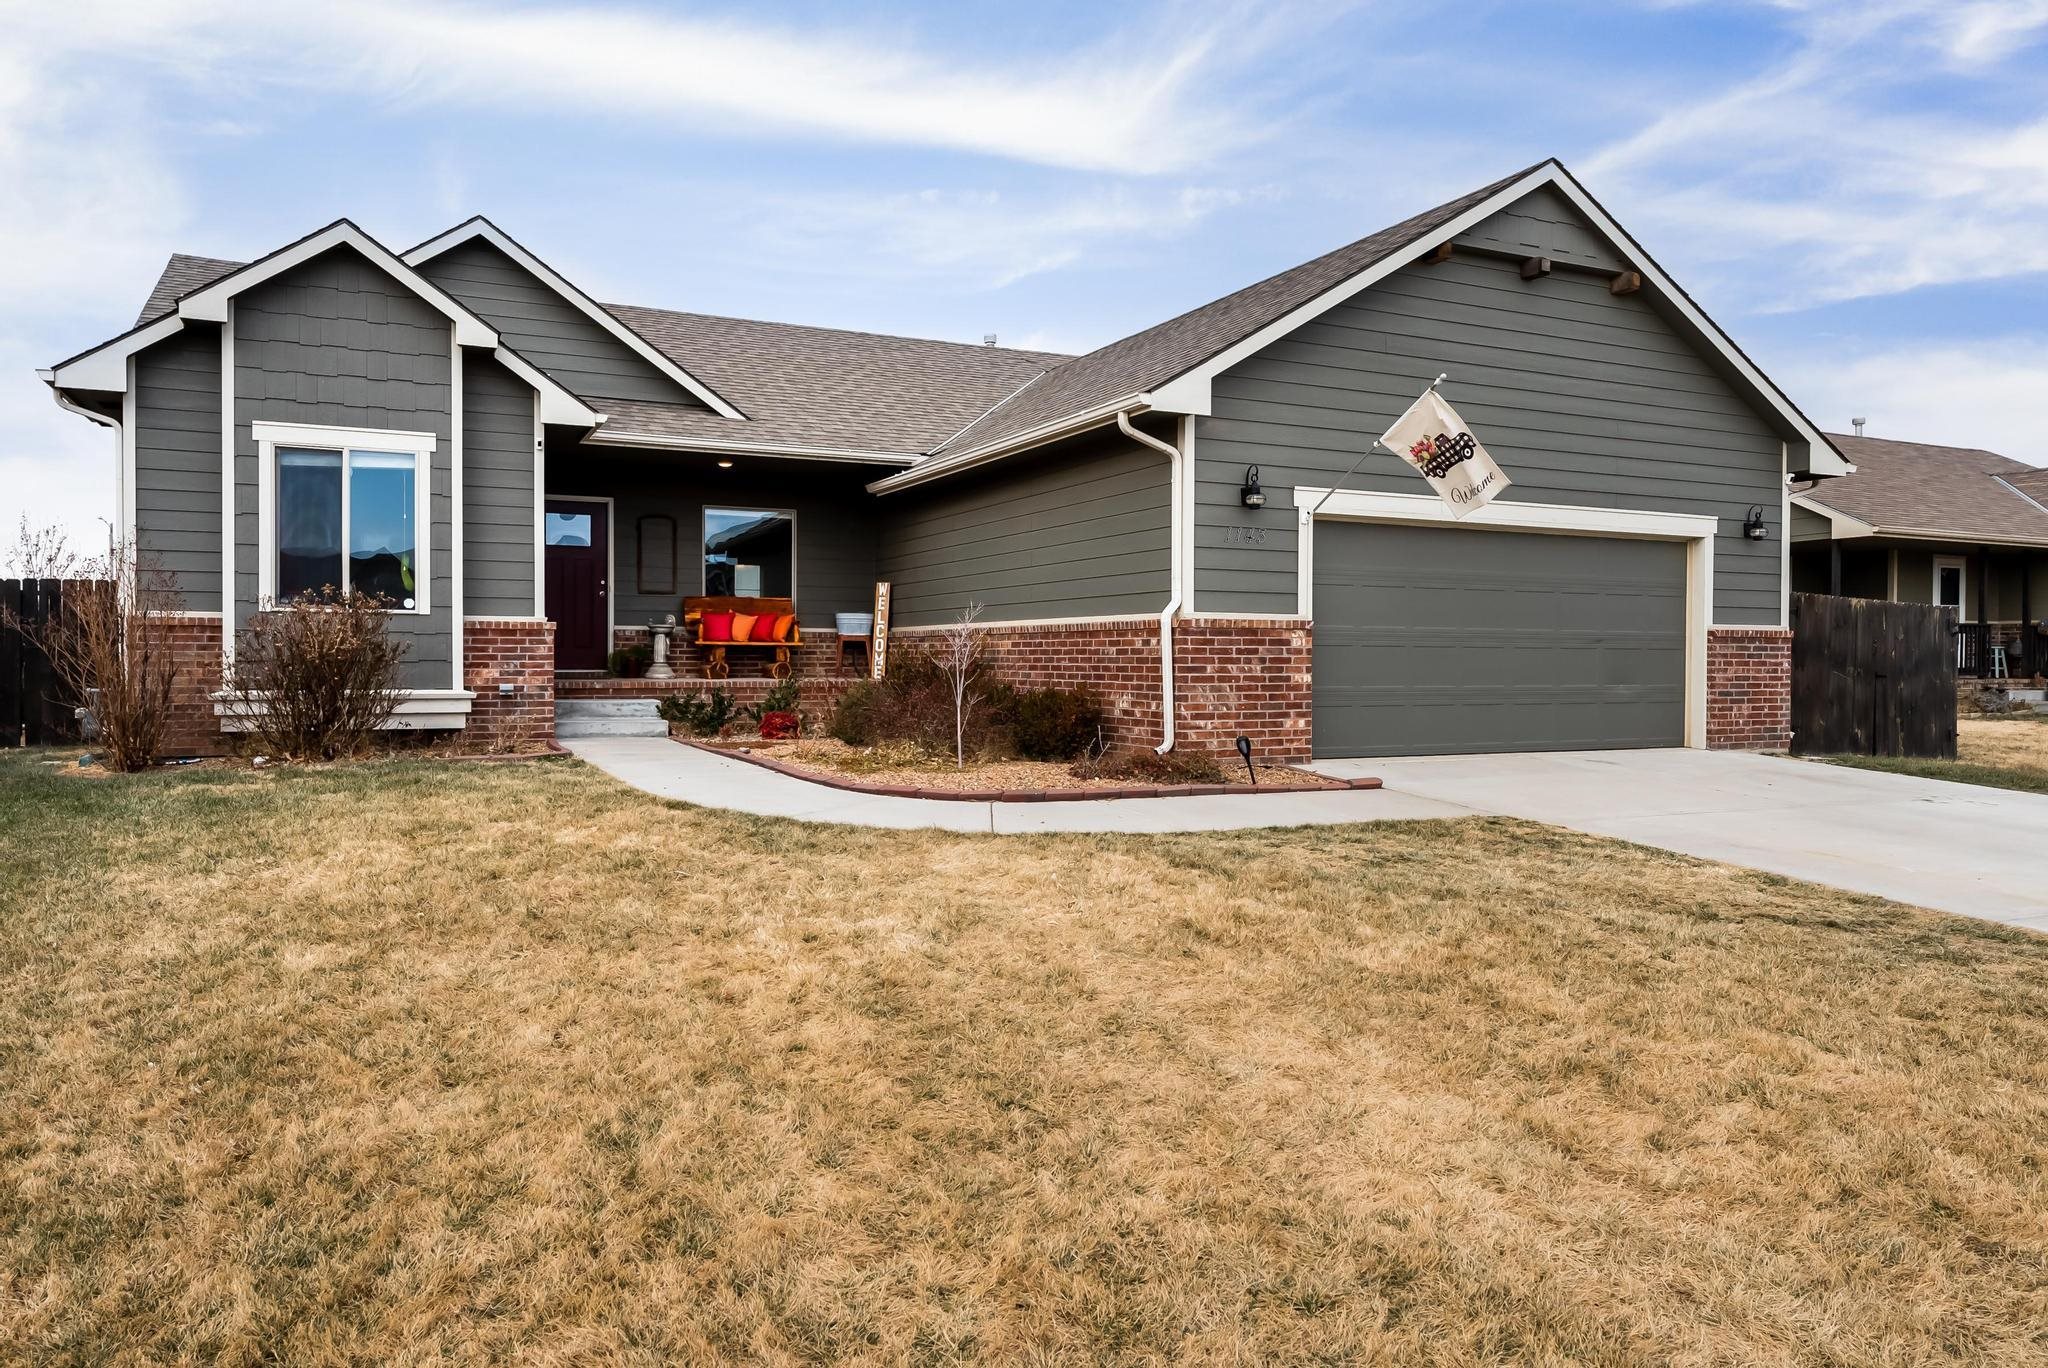 NO SPECIALS on this 5 bedroom, 3 bath home in Chisholm Ridge in Clearwater, Kansas! If you love open